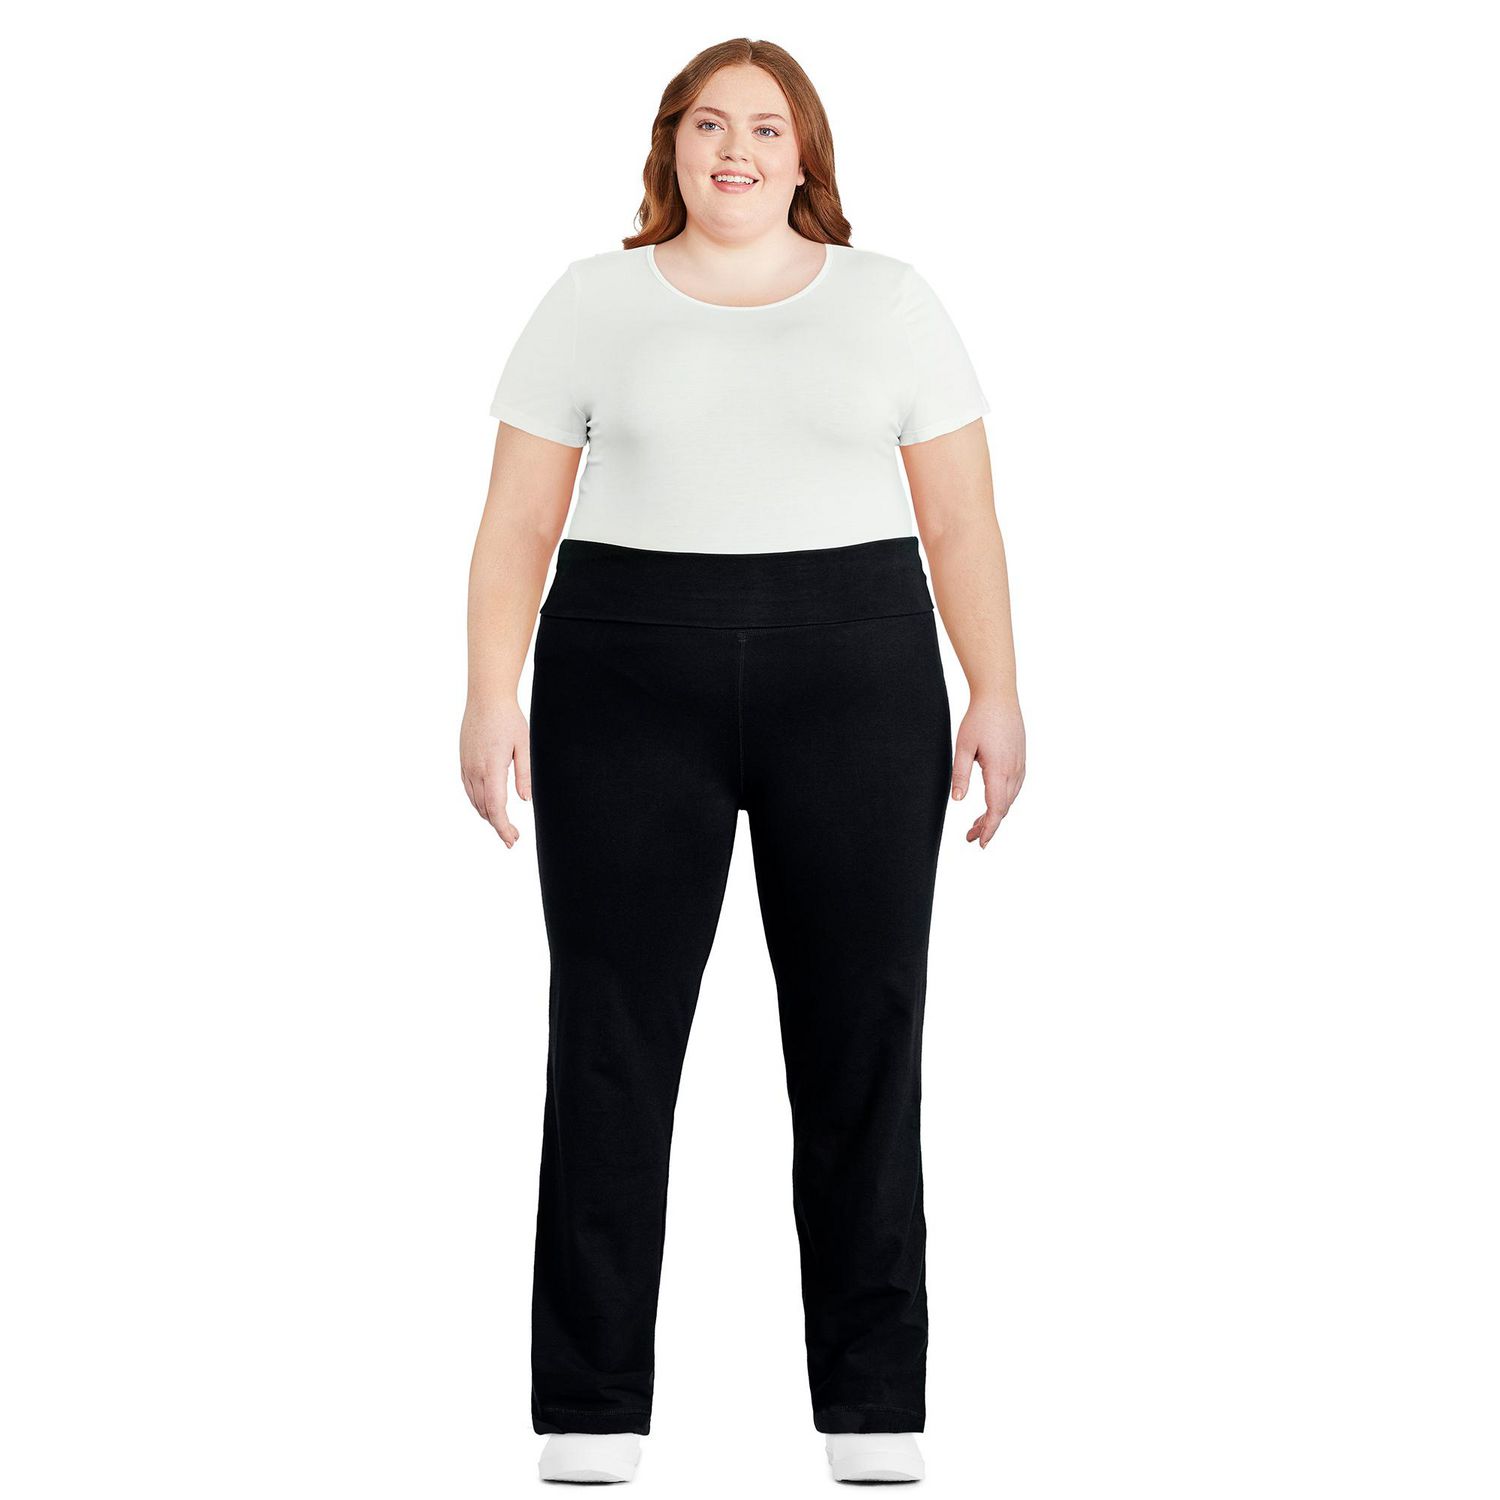 13 Best PlusSize Yoga Pants And Leggings For 2022